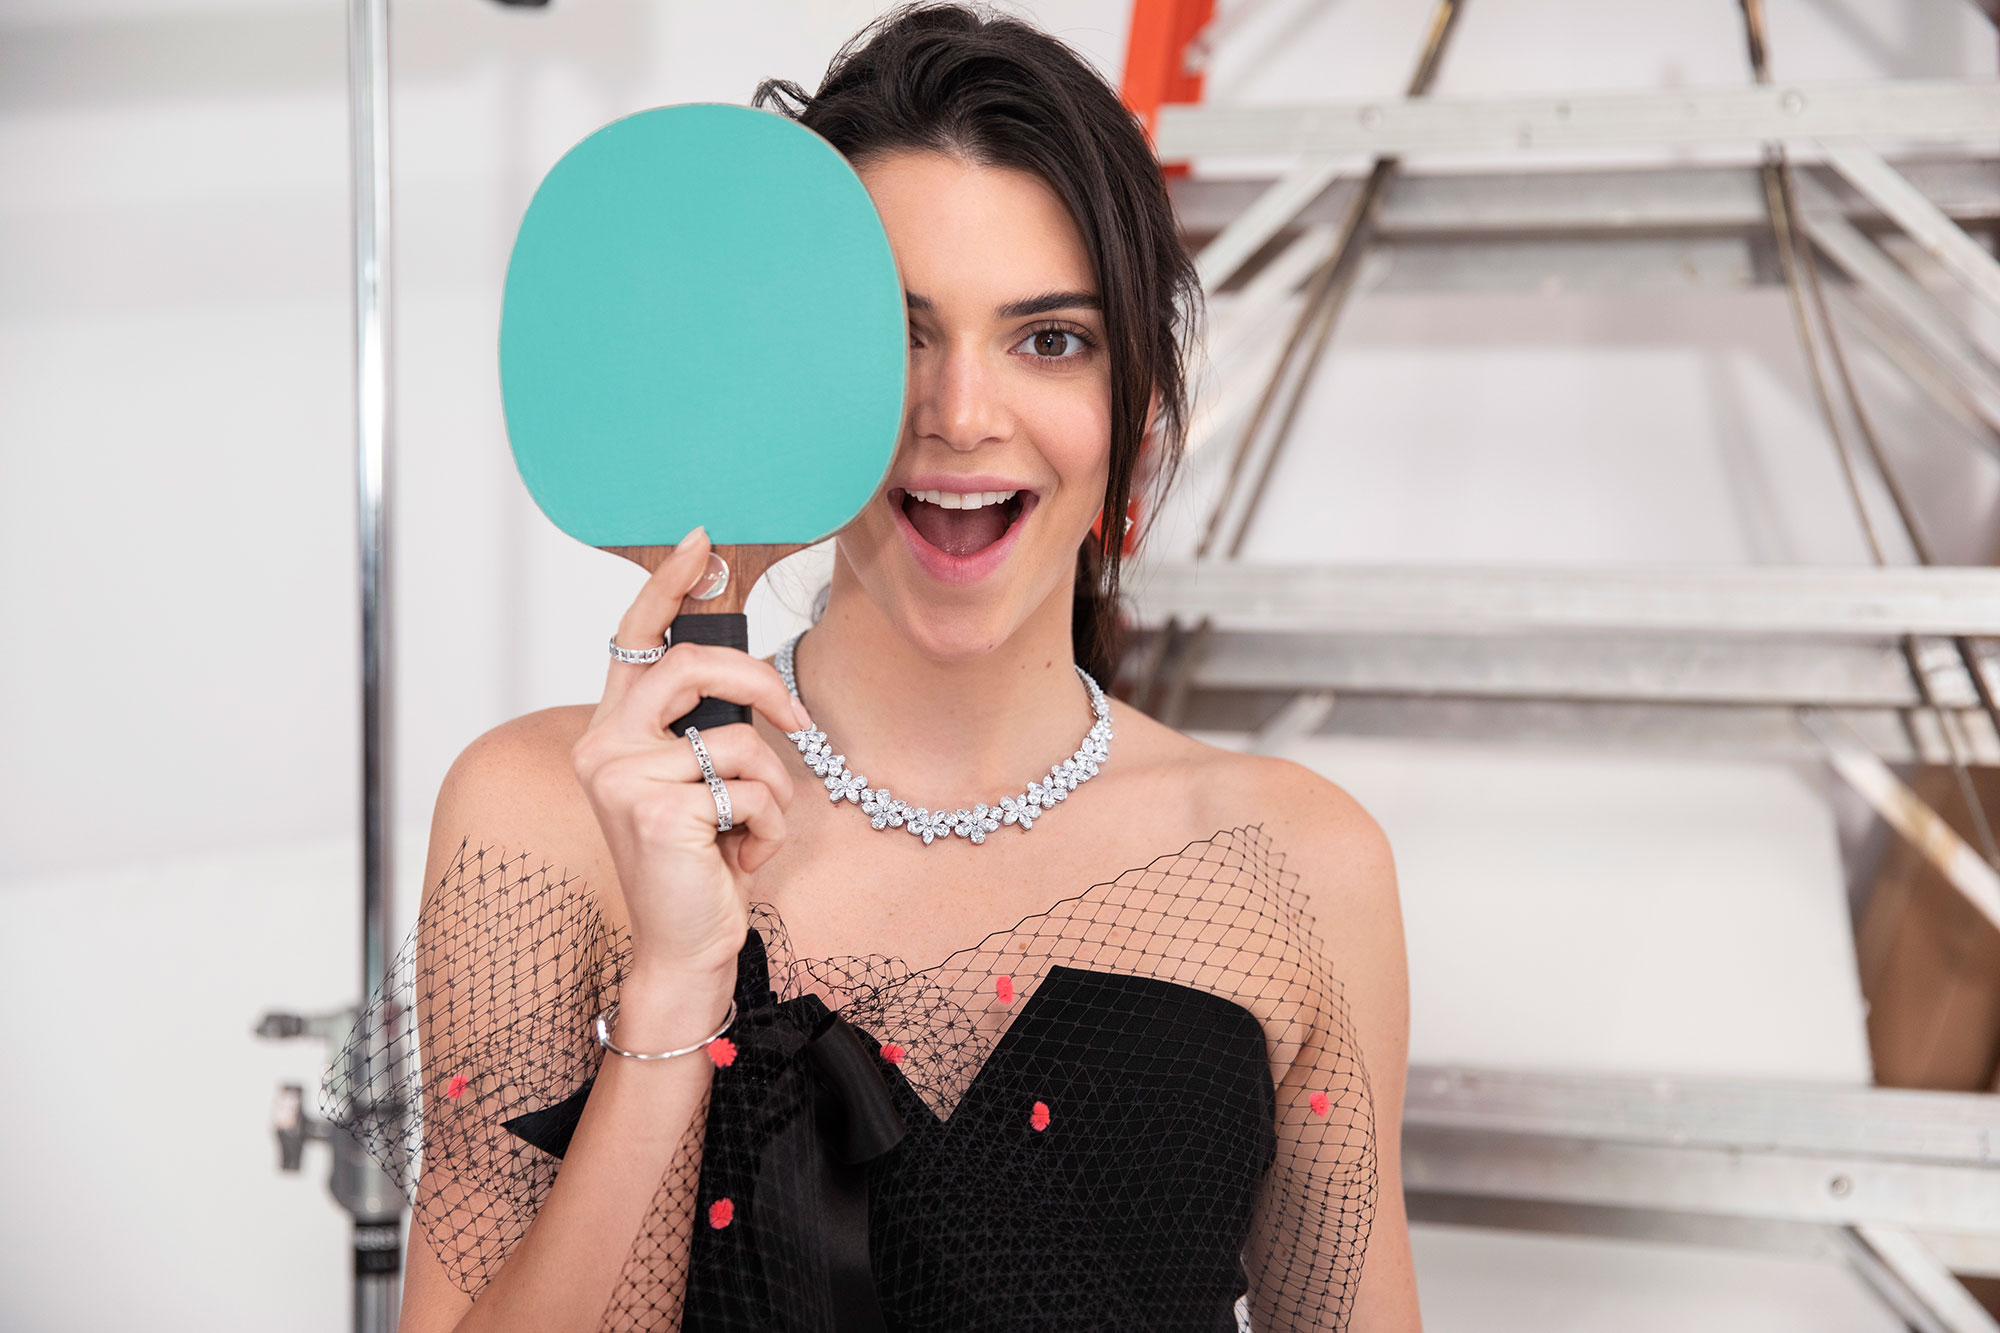 tiffany and co ping pong